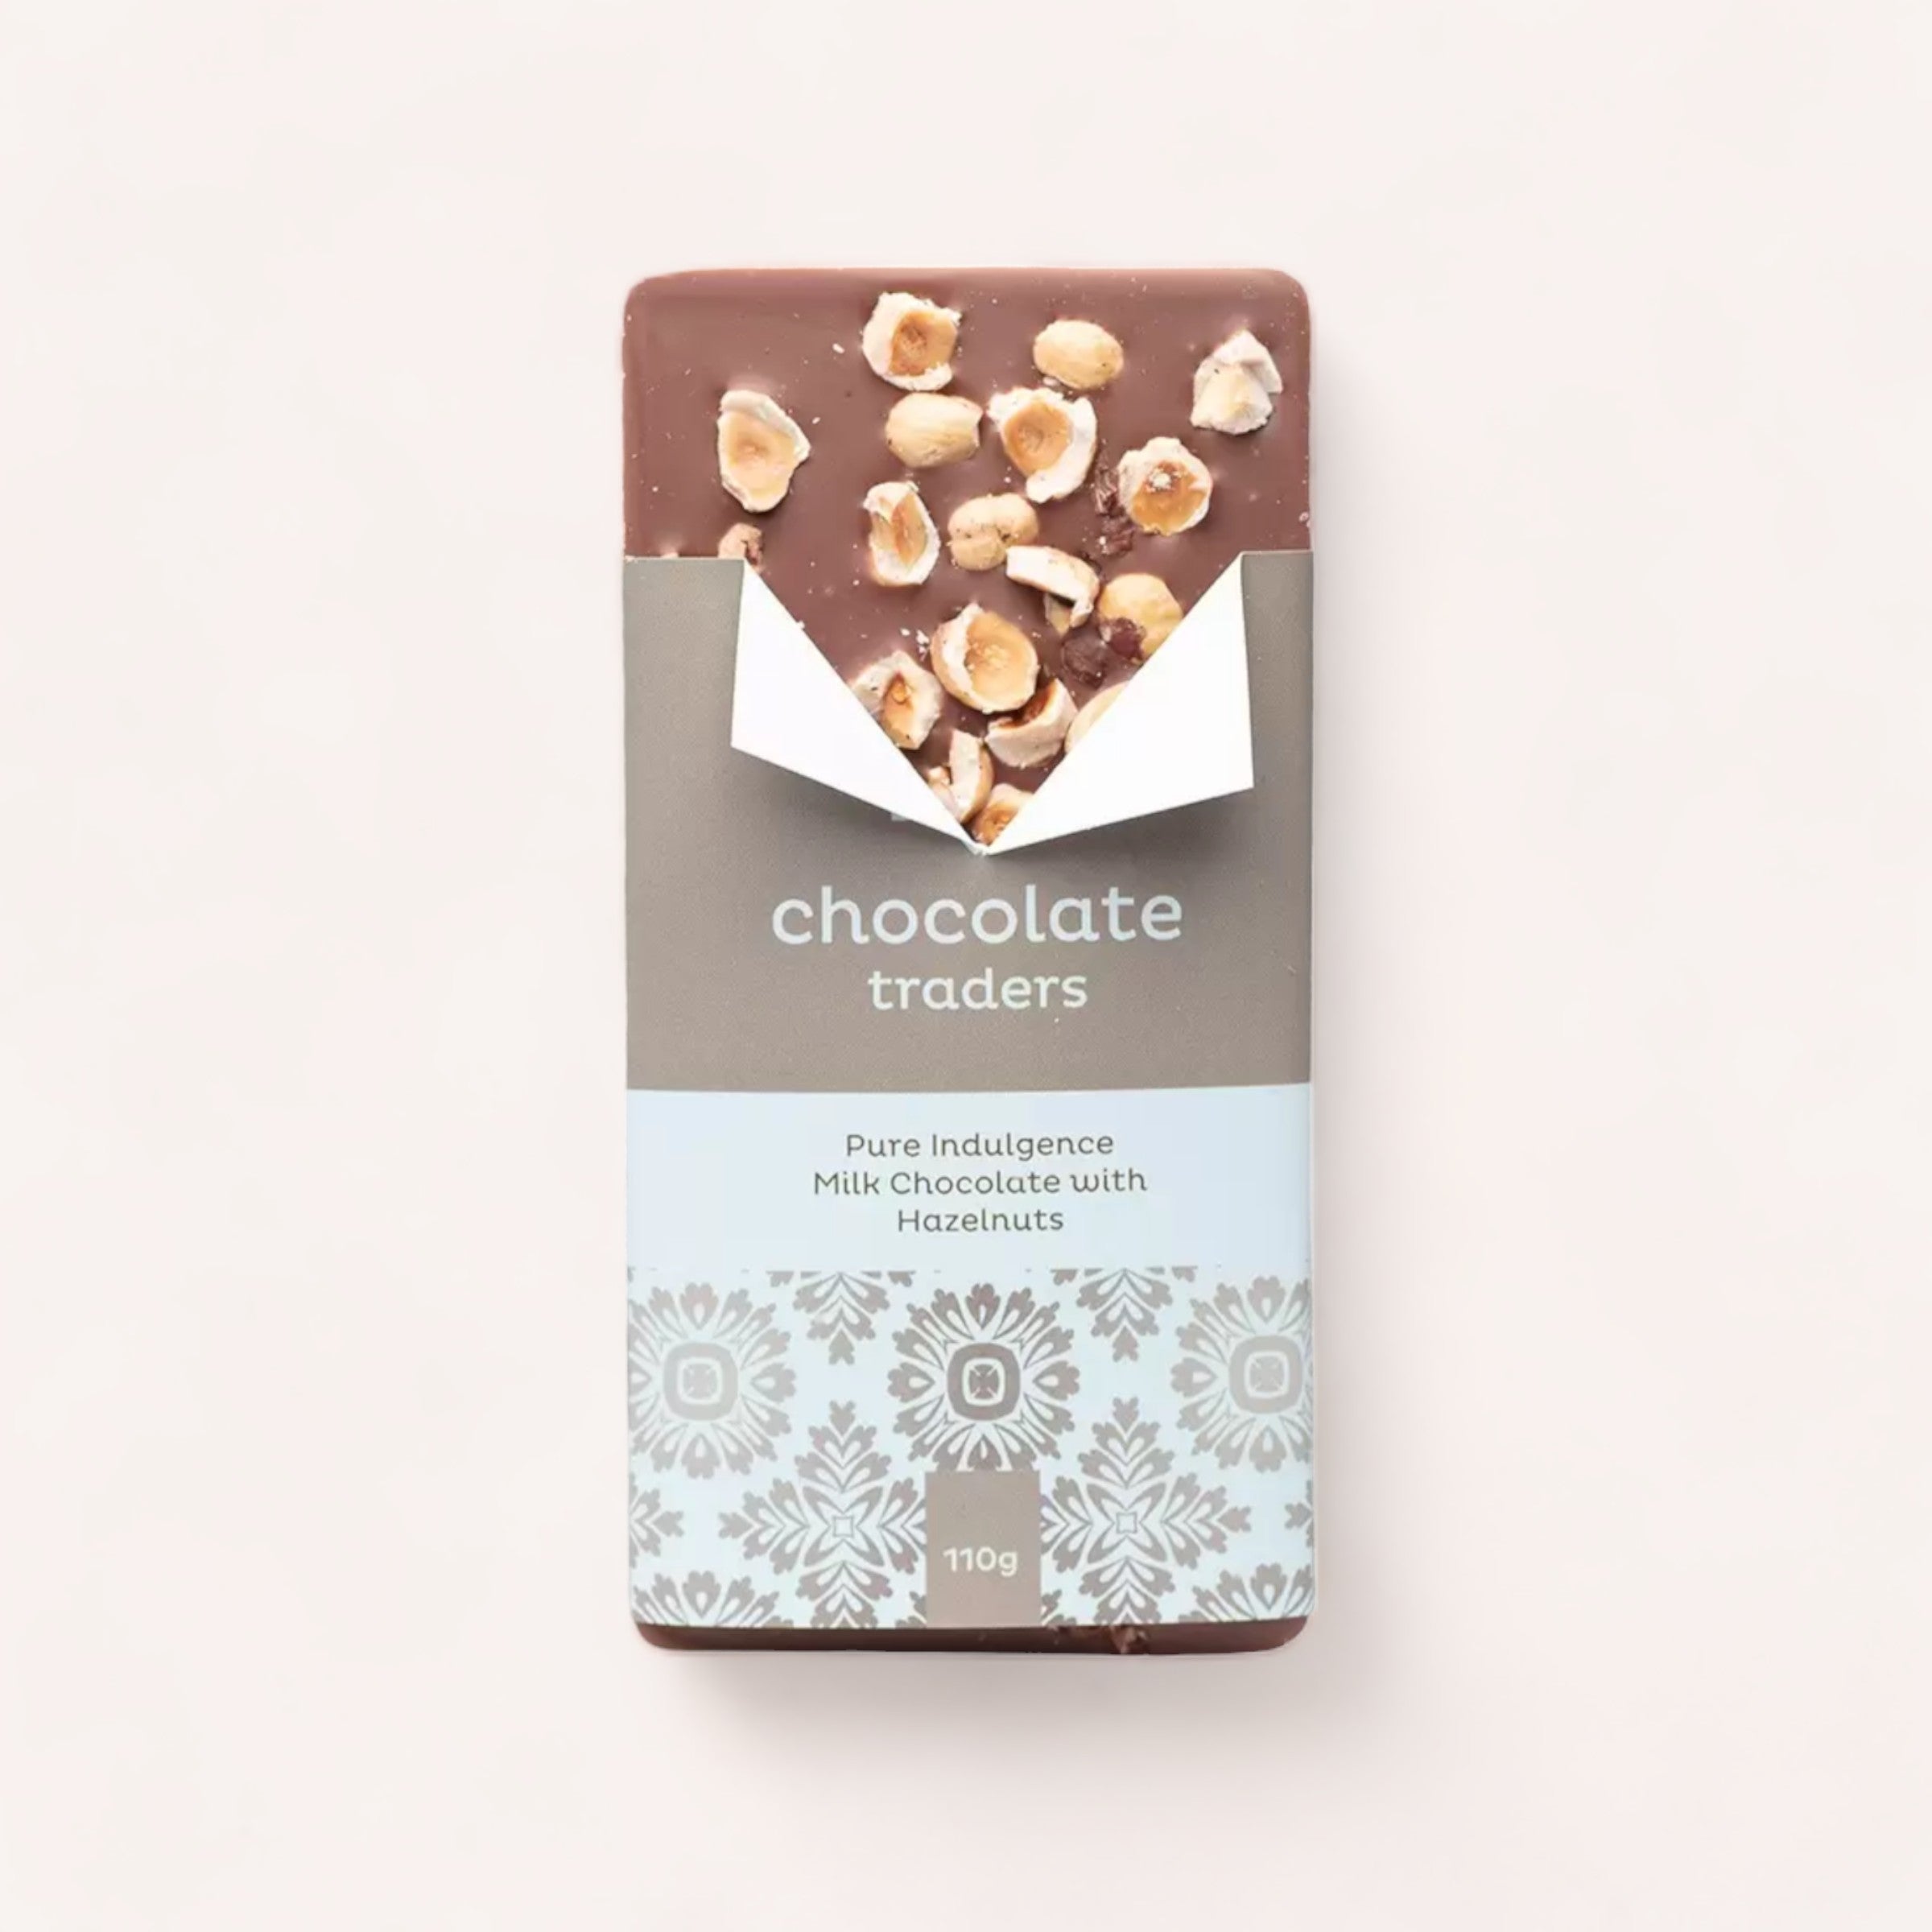 A hand-crafted bar of Pure Indulgence Hazelnut chocolate by Chocolate Traders, in elegant packaging, presented on a neutral background—inviting a taste of pure indulgence.